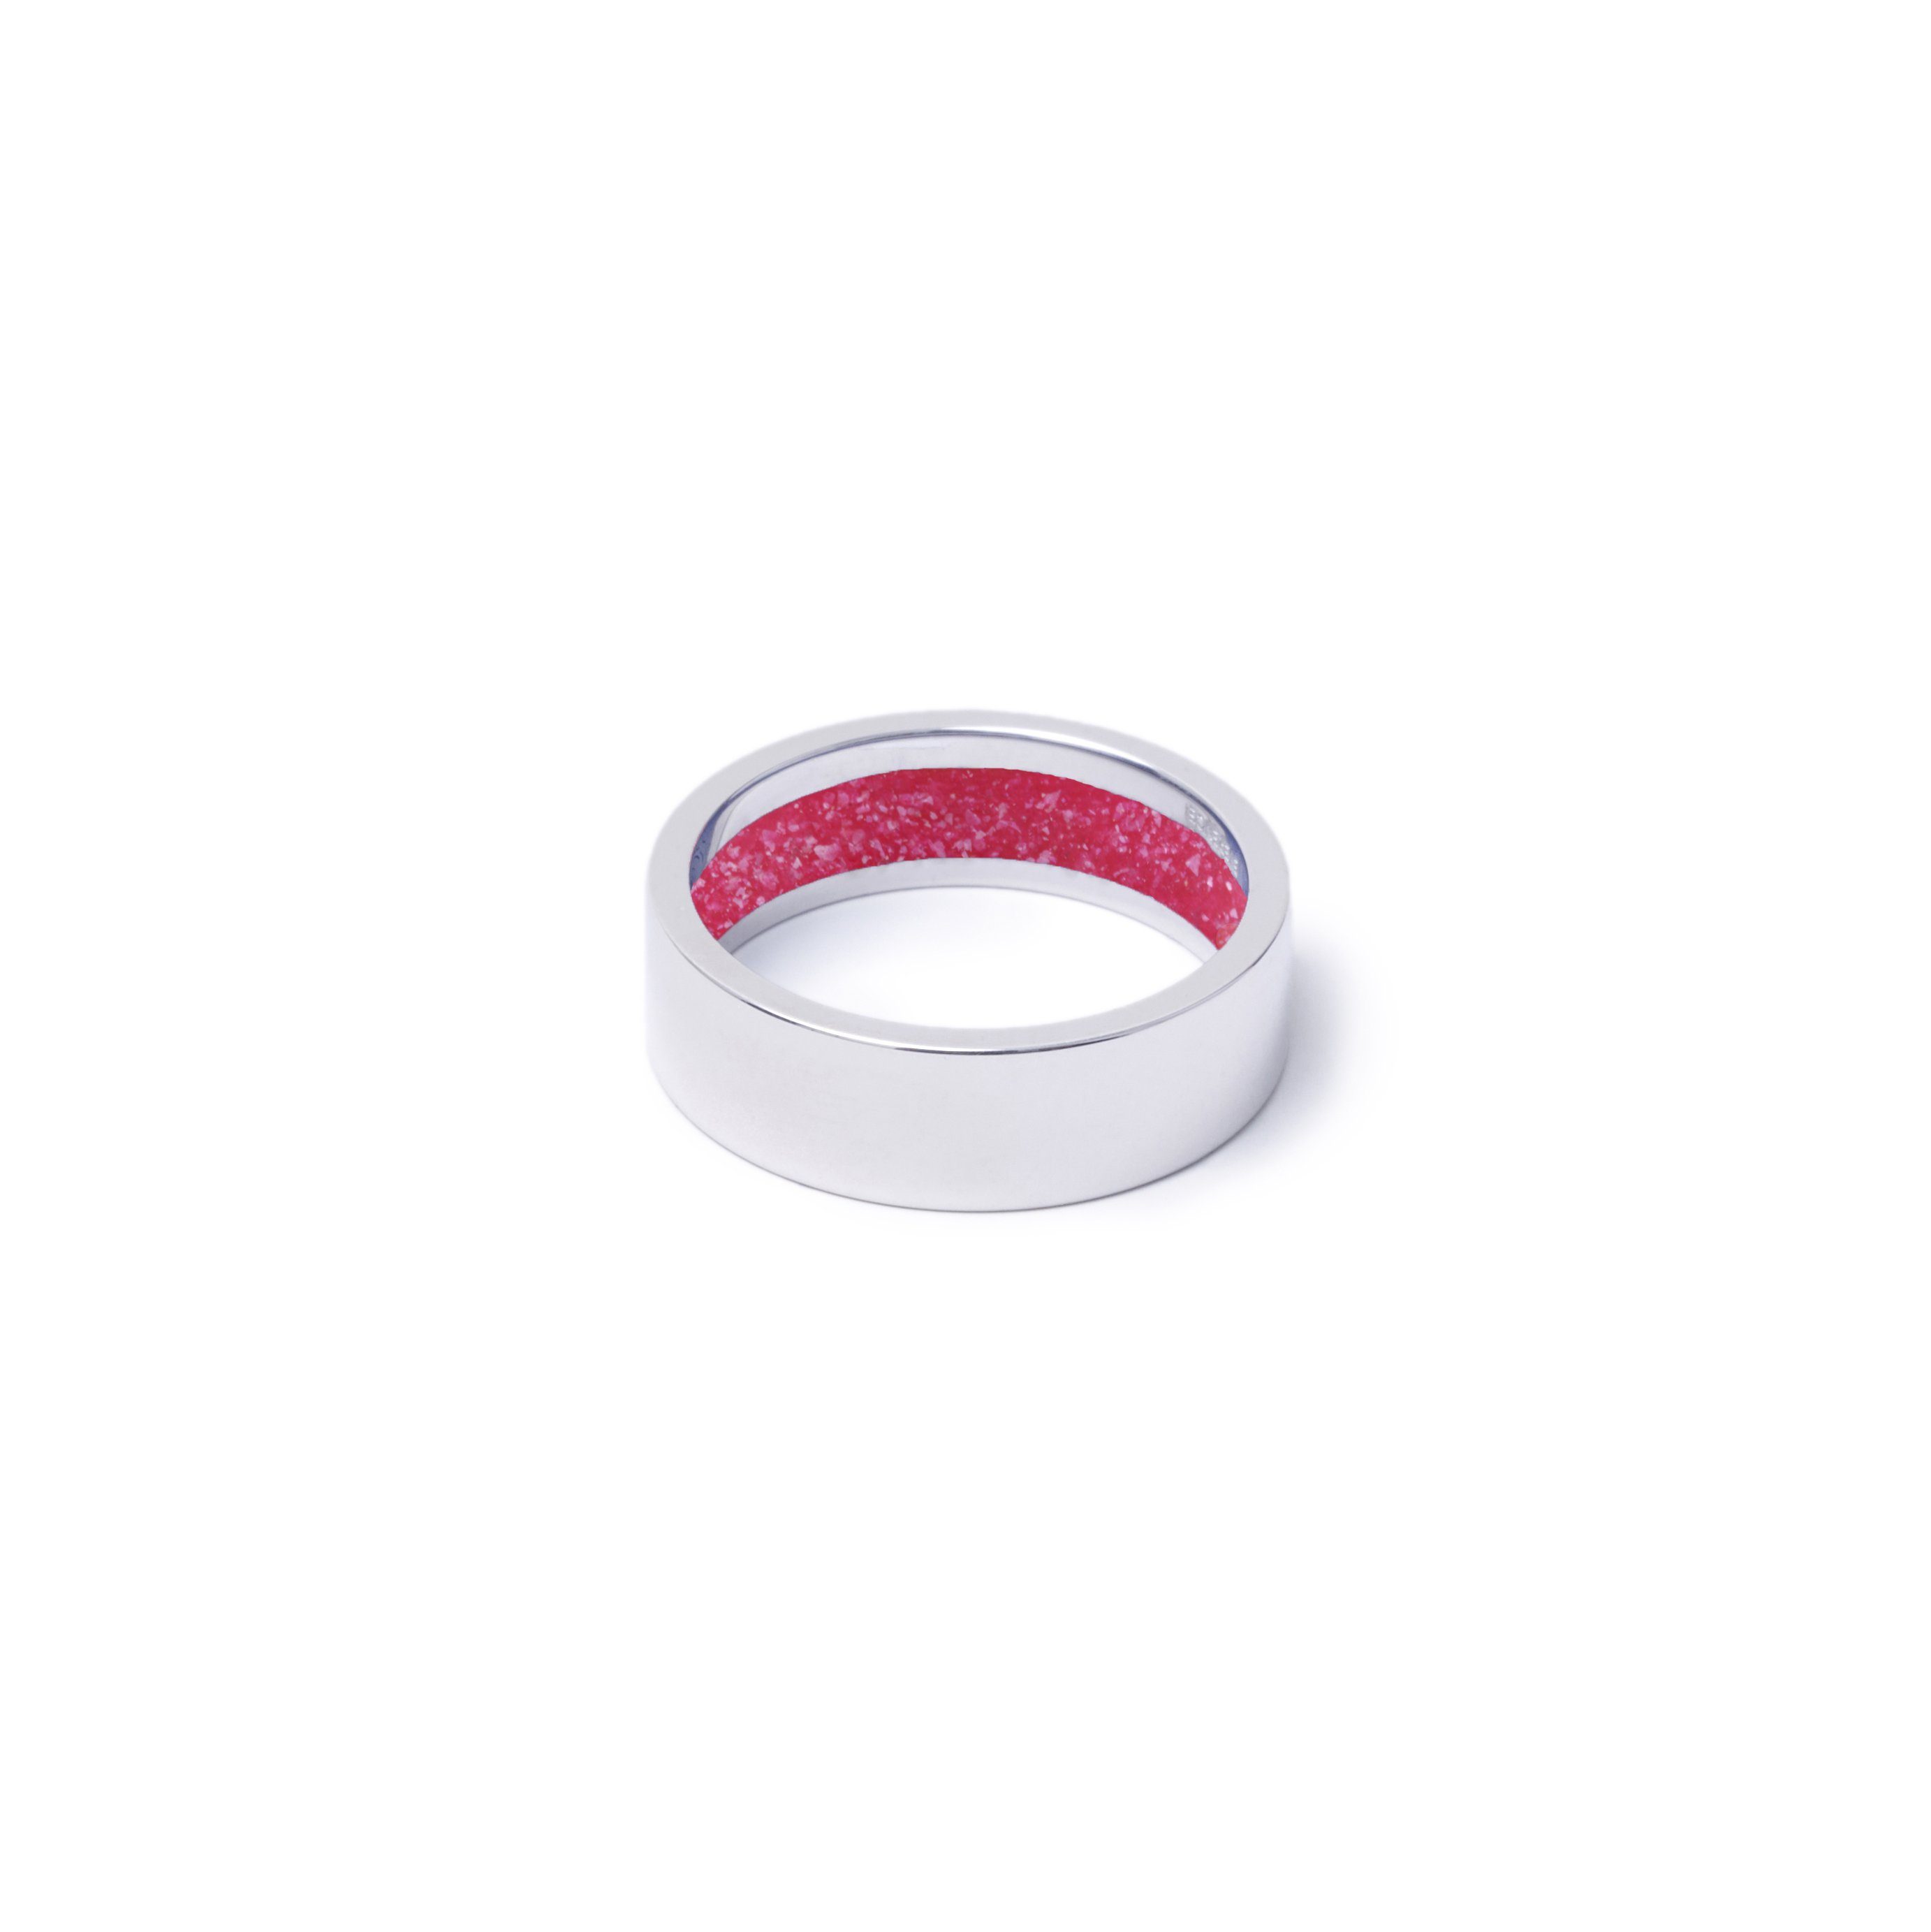 Everence Ring, 10k White Gold everence.life 6mm Scarlet 